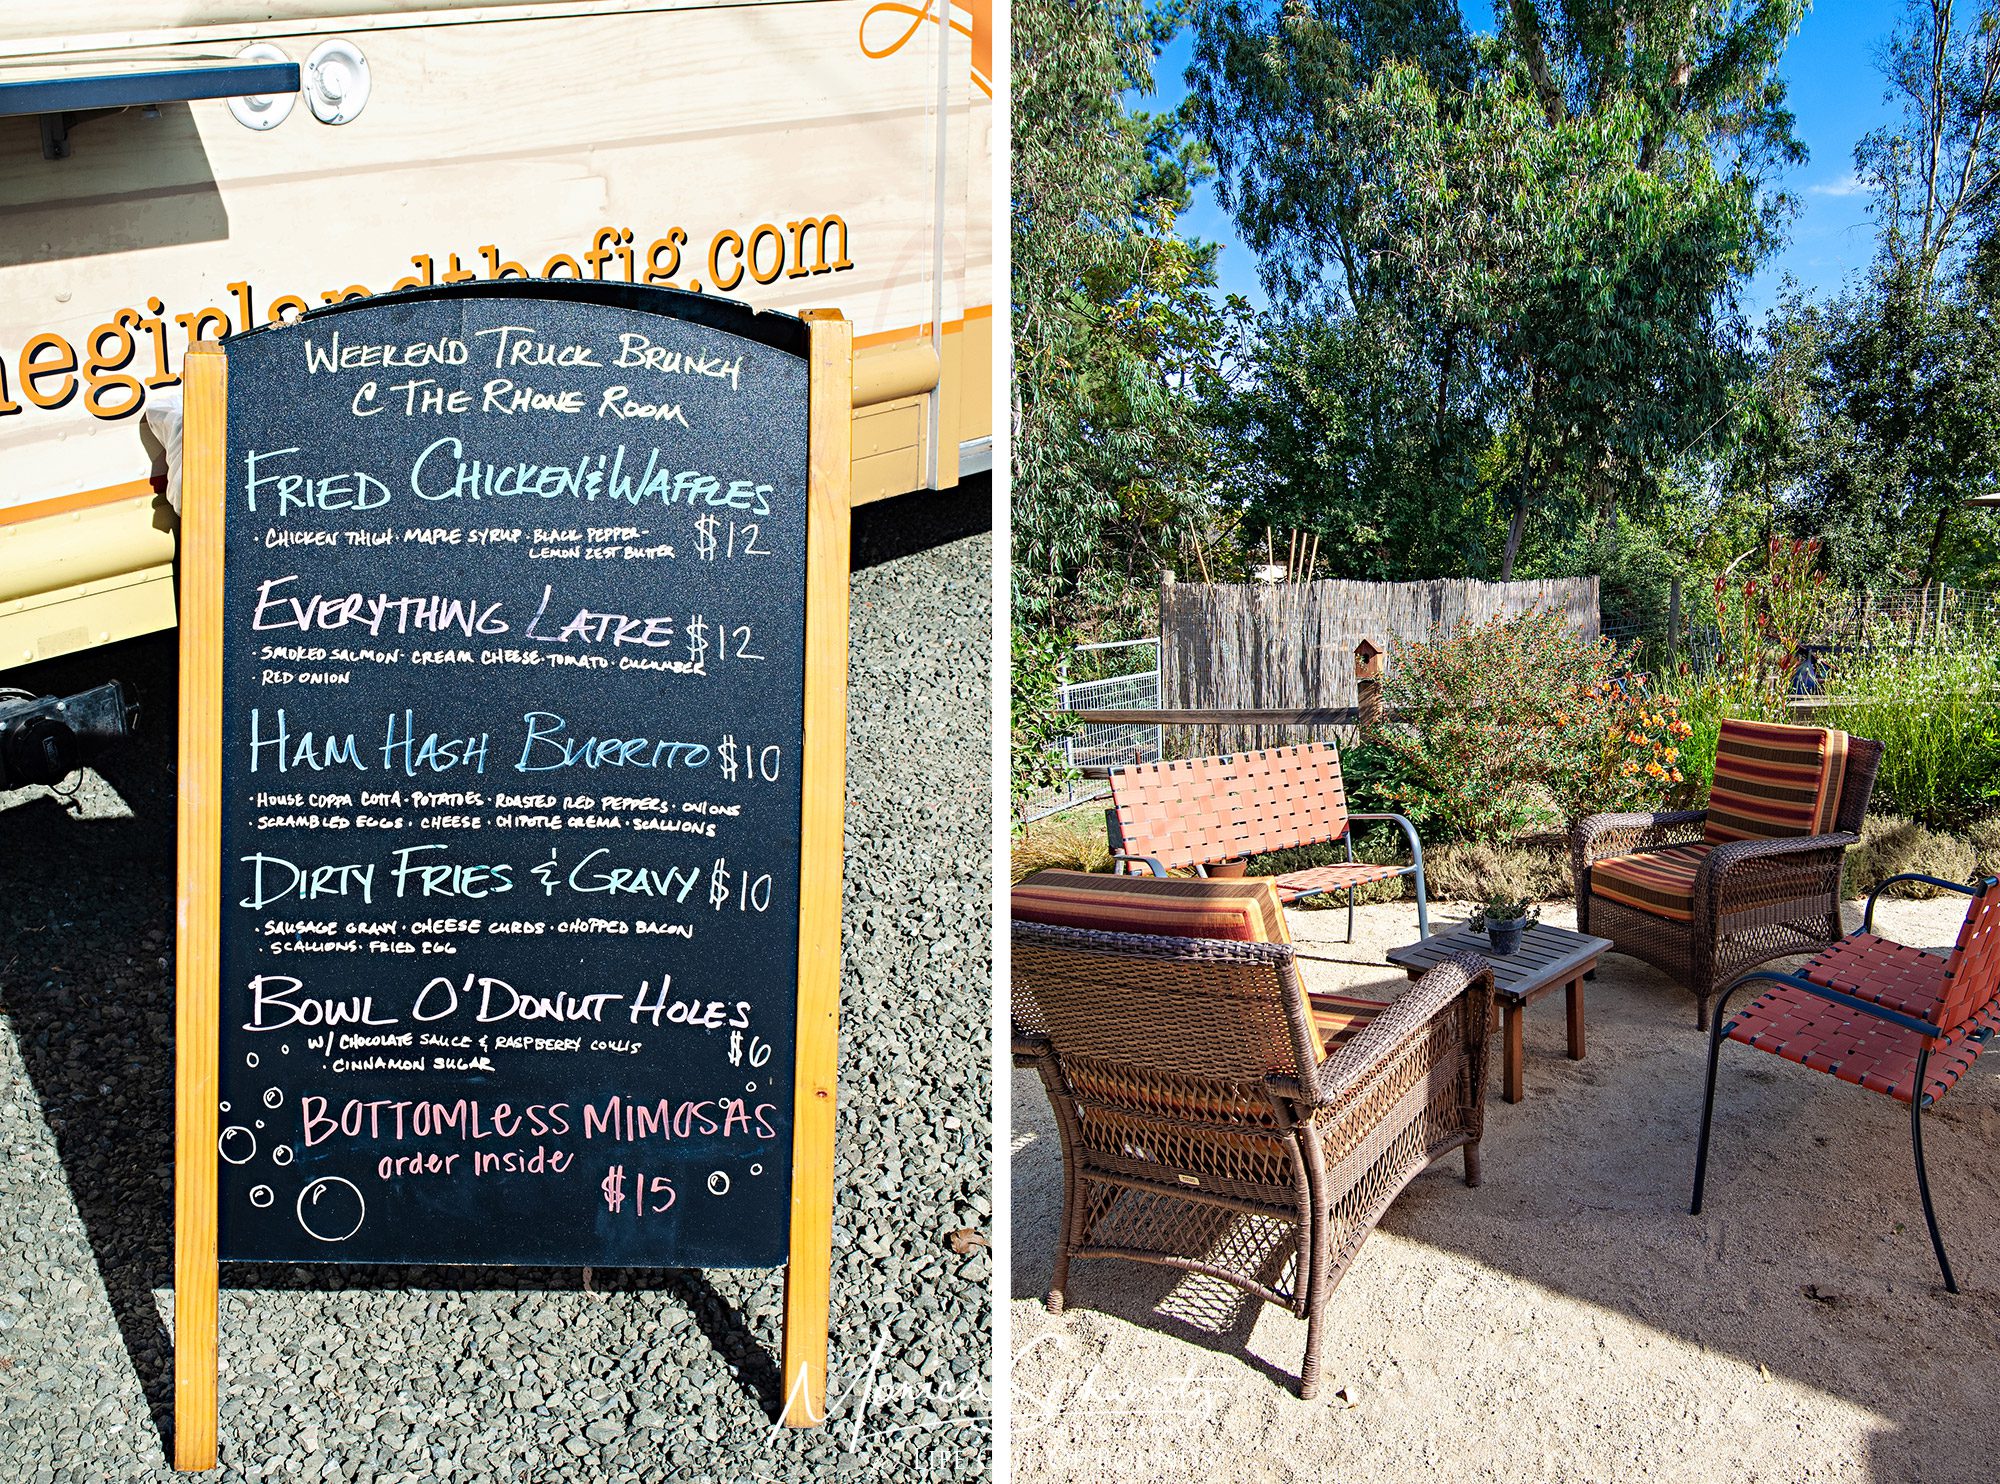 The-Fig-Rig-food-truck-menu-and-outdoor-tasting-garden-at-The-Rhone-Room-in-Sonoma-California